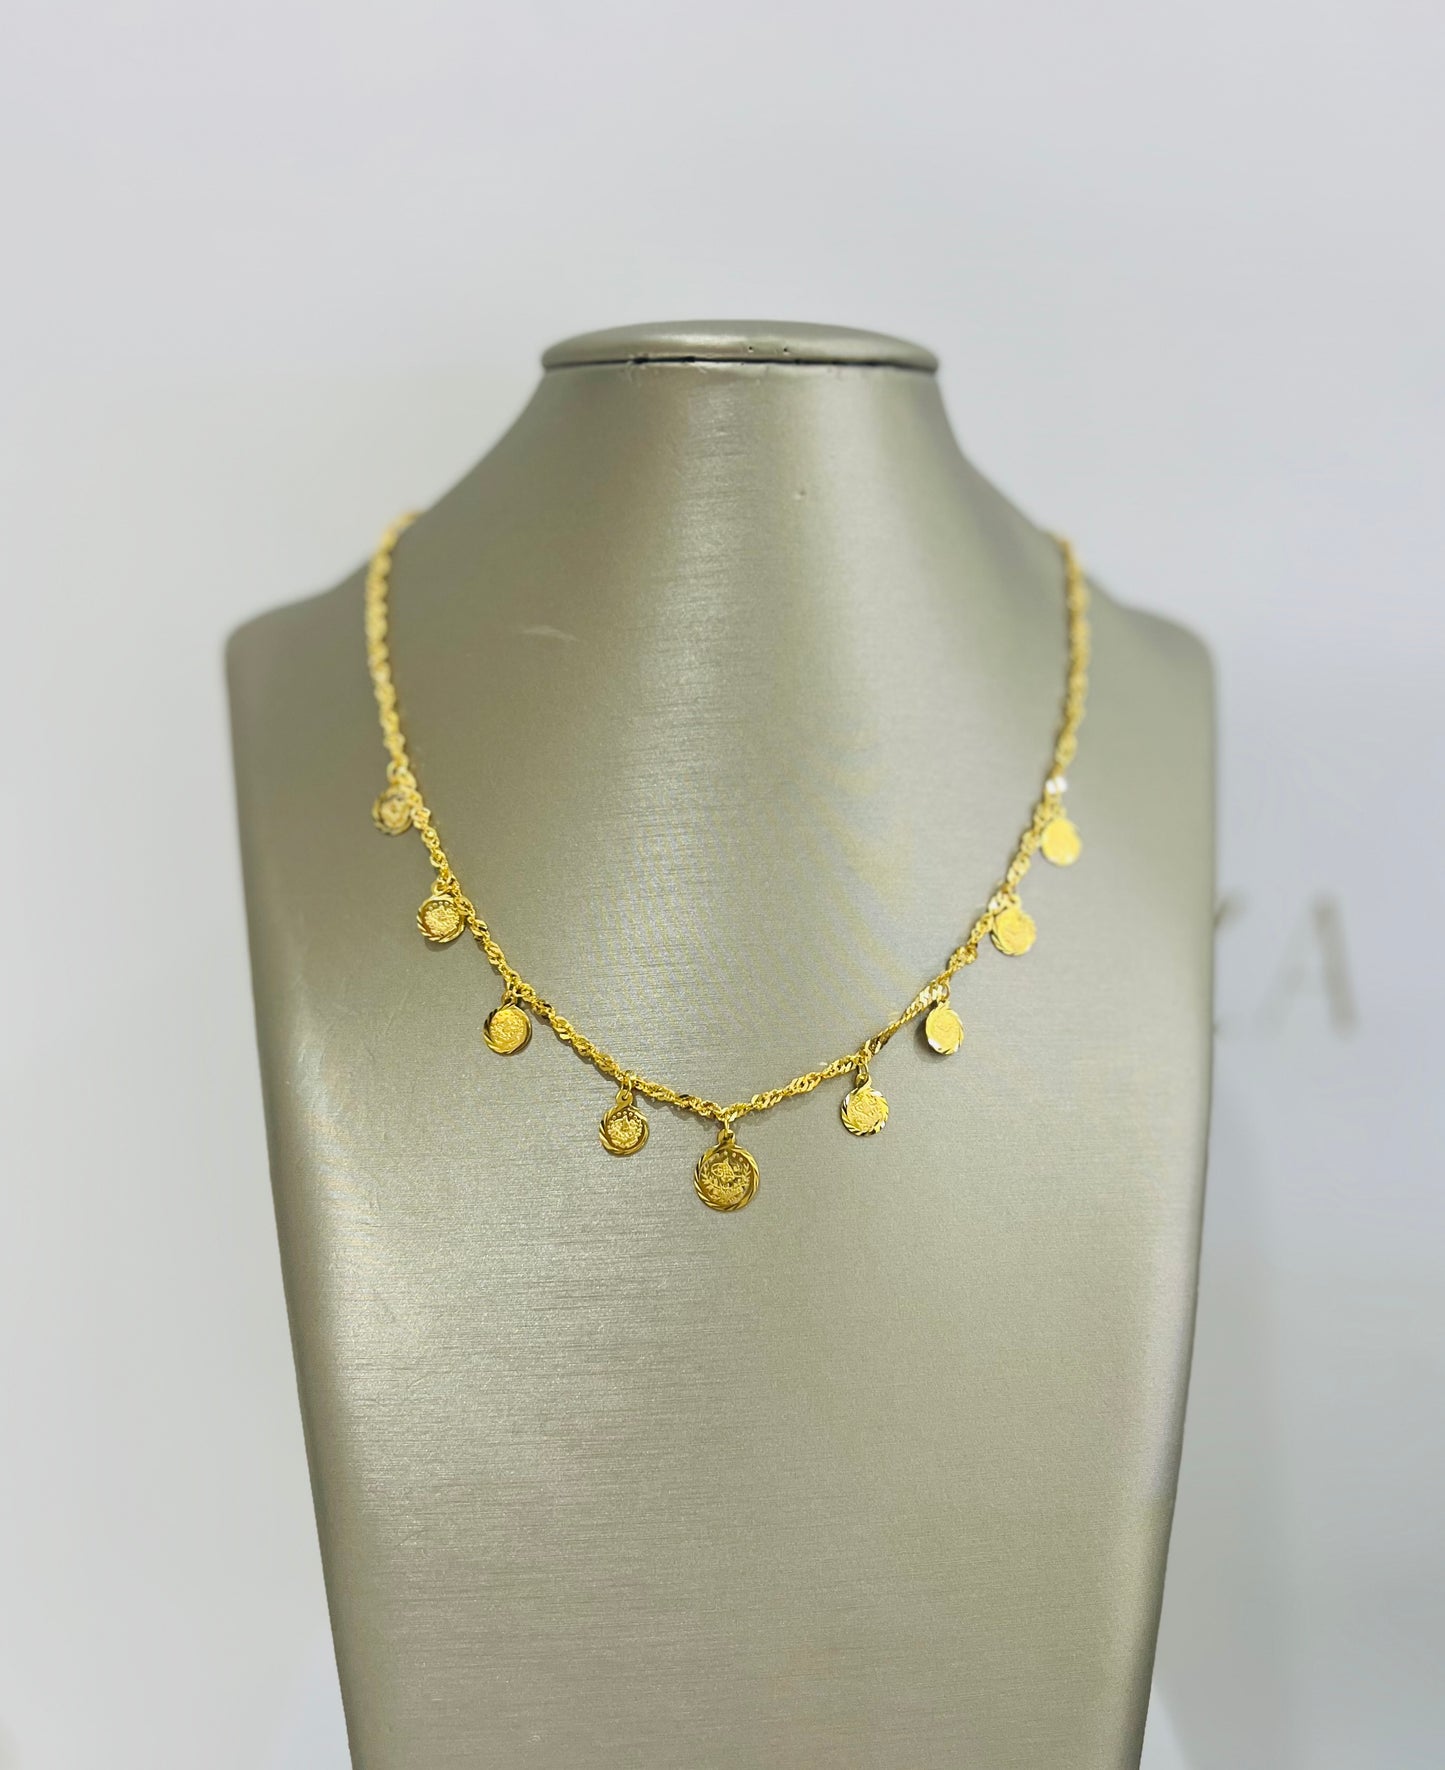 21k Gold Turkish Coin Necklace